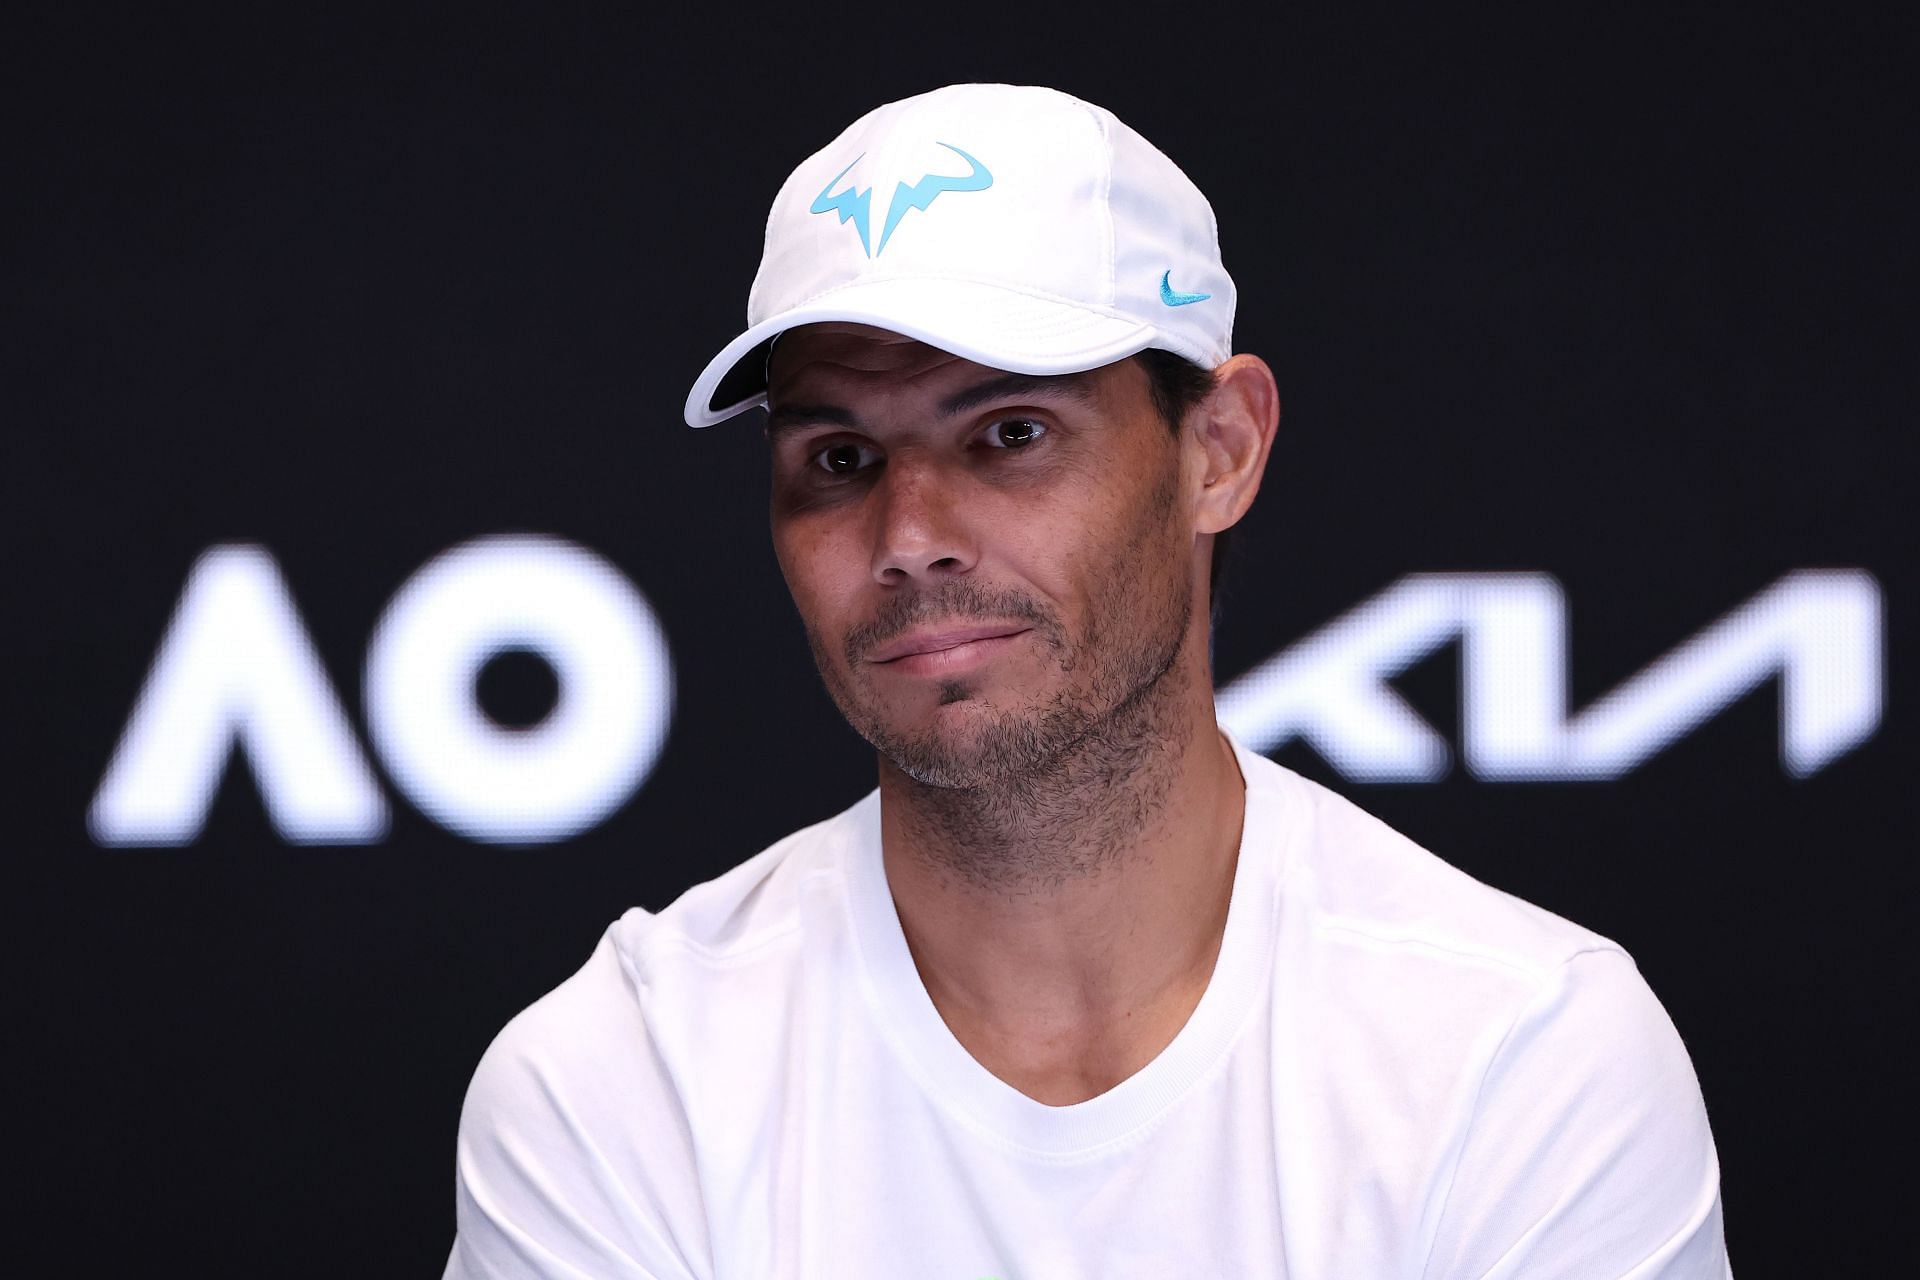 Rafael Nadal pictured at a press conference.